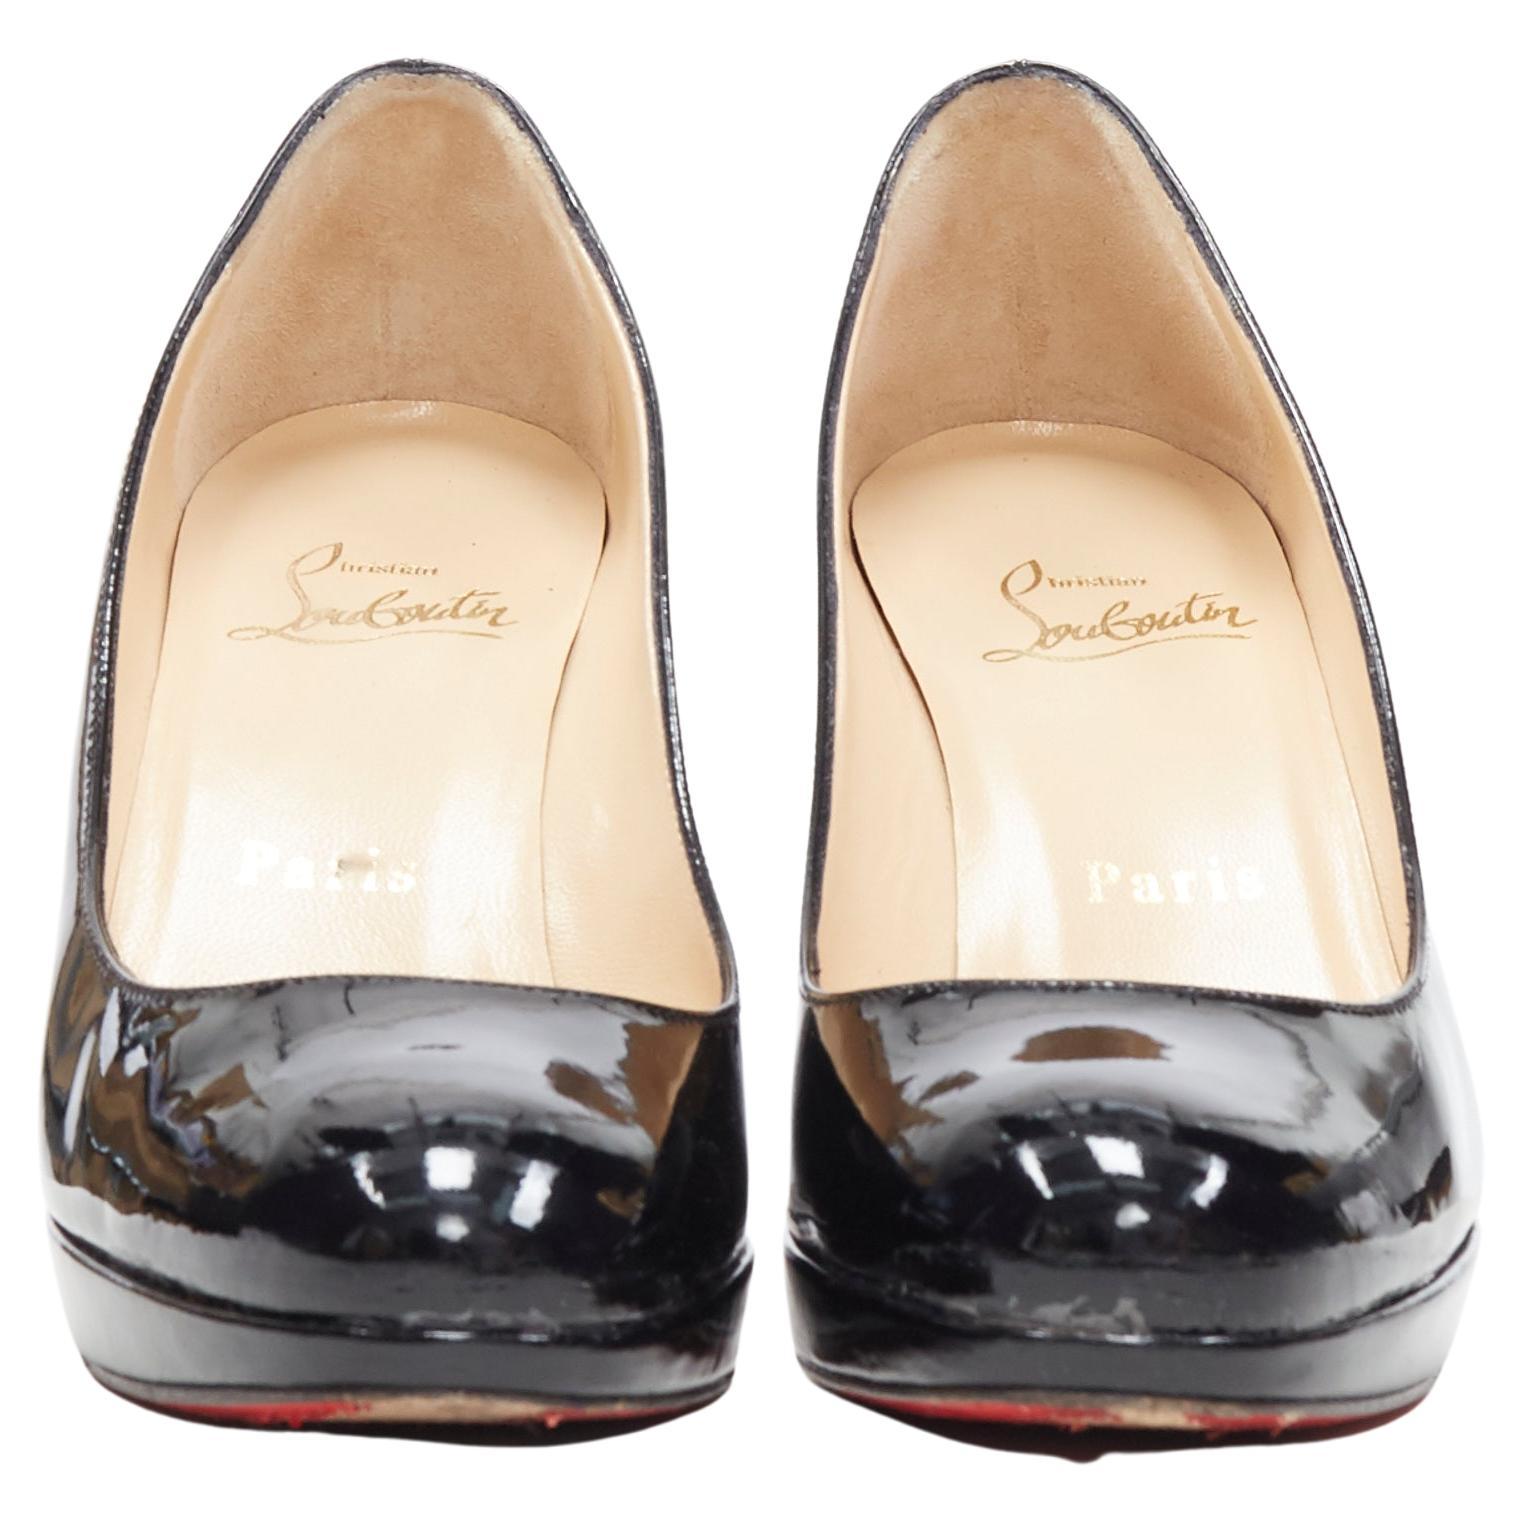 CHRISTIAN LOUBOUTIN black patent platform round toe high heel pump EU36
Brand: Christian Louboutin
Model: Platform pump
Material: Leather
Color: Black
Pattern: Solid
Made in: Italy

CONDITION:
Condition: Good, this item was pre-owned and is in good